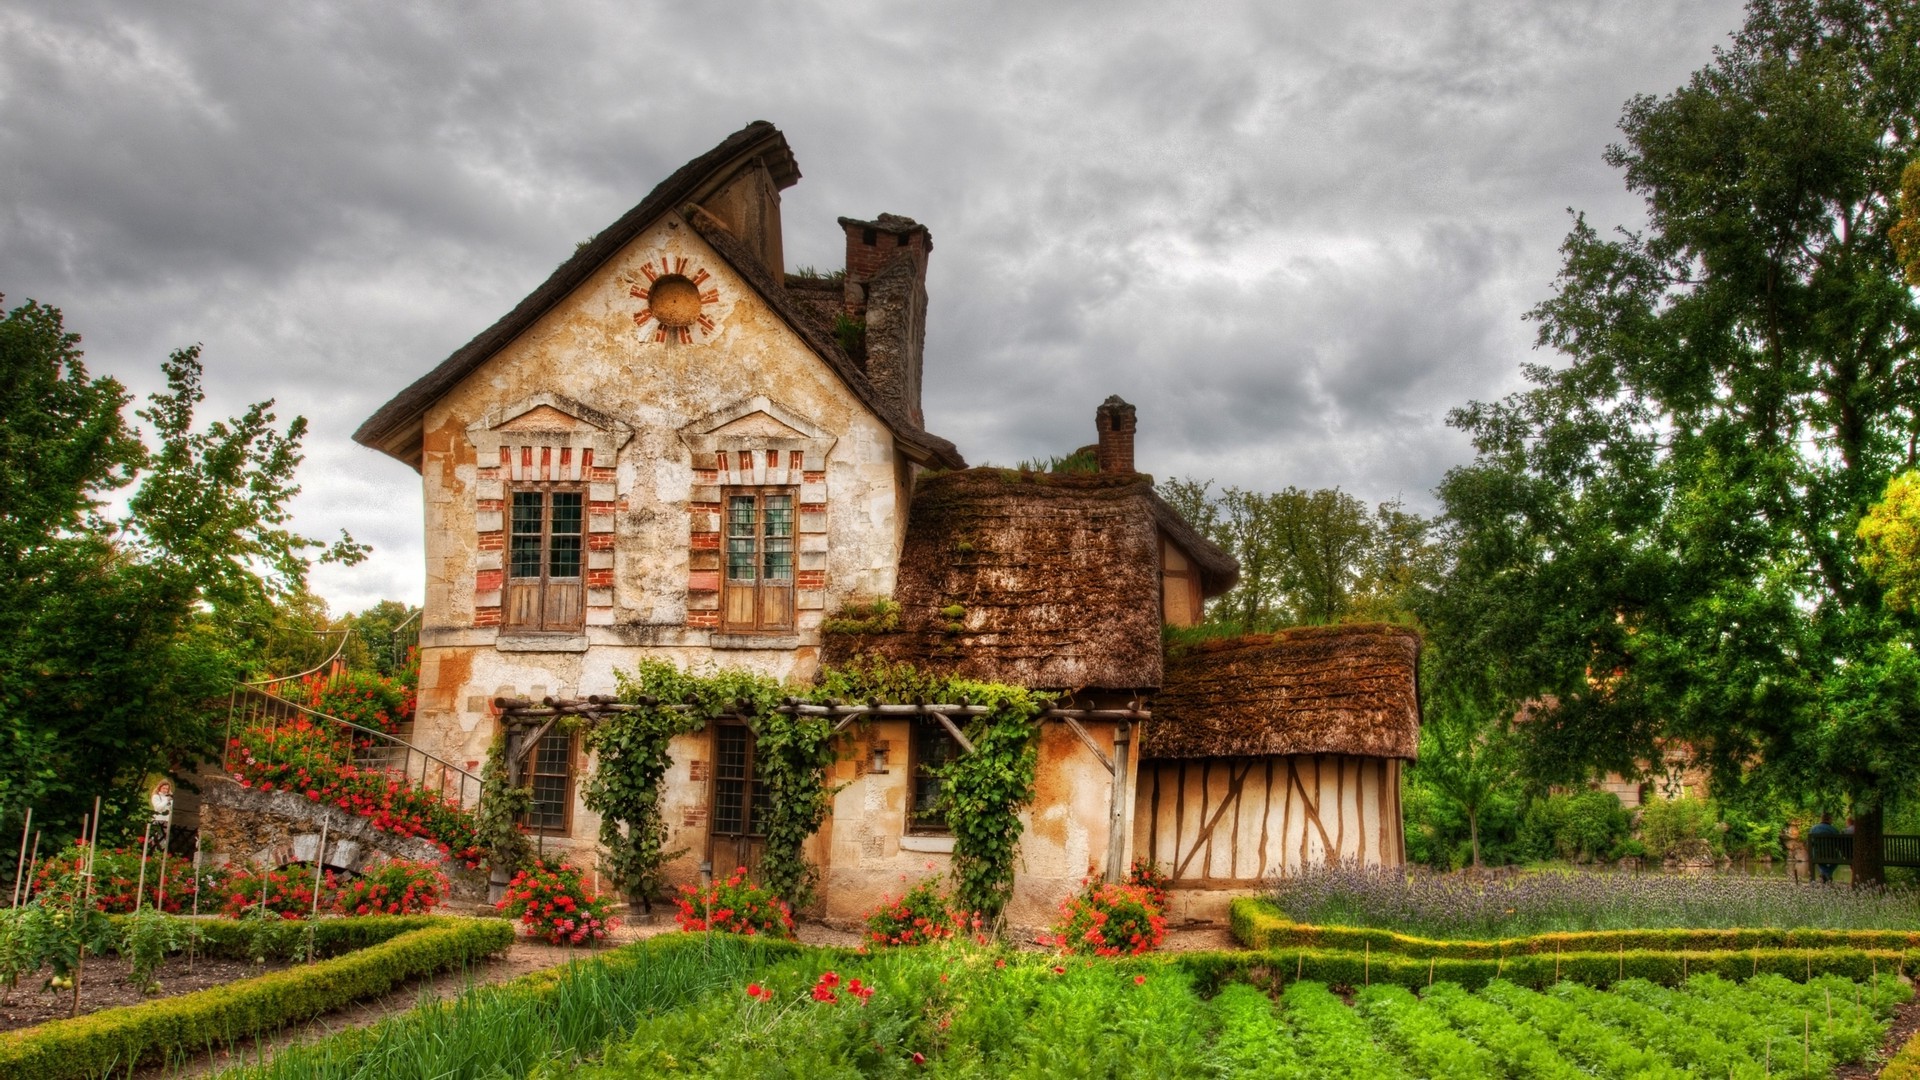 architecture, Old Building, House, HDR, Nature, Garden, Flowers, Plants, Trees, Clouds, France, Stairs, Door, Window, Chimneys Wallpaper